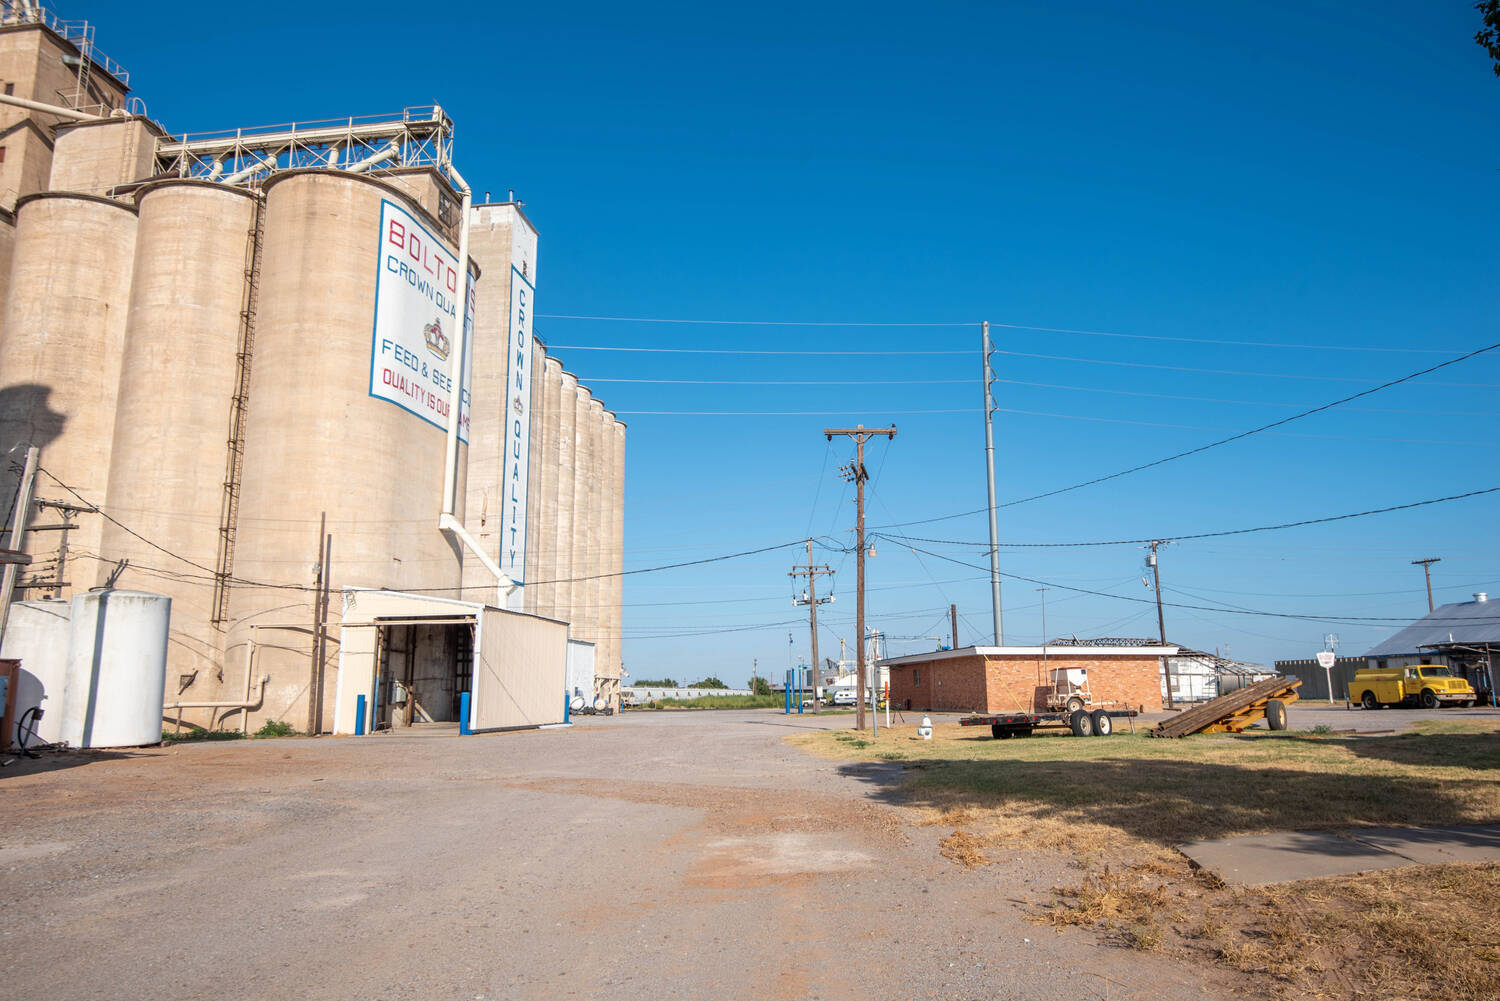 Boltons-Crown-Quality-Feed-Grain-Elevator-Vernon-TX-Wilbarger-County-Republic-Ranches-Bryan-Pickens-24-of-25